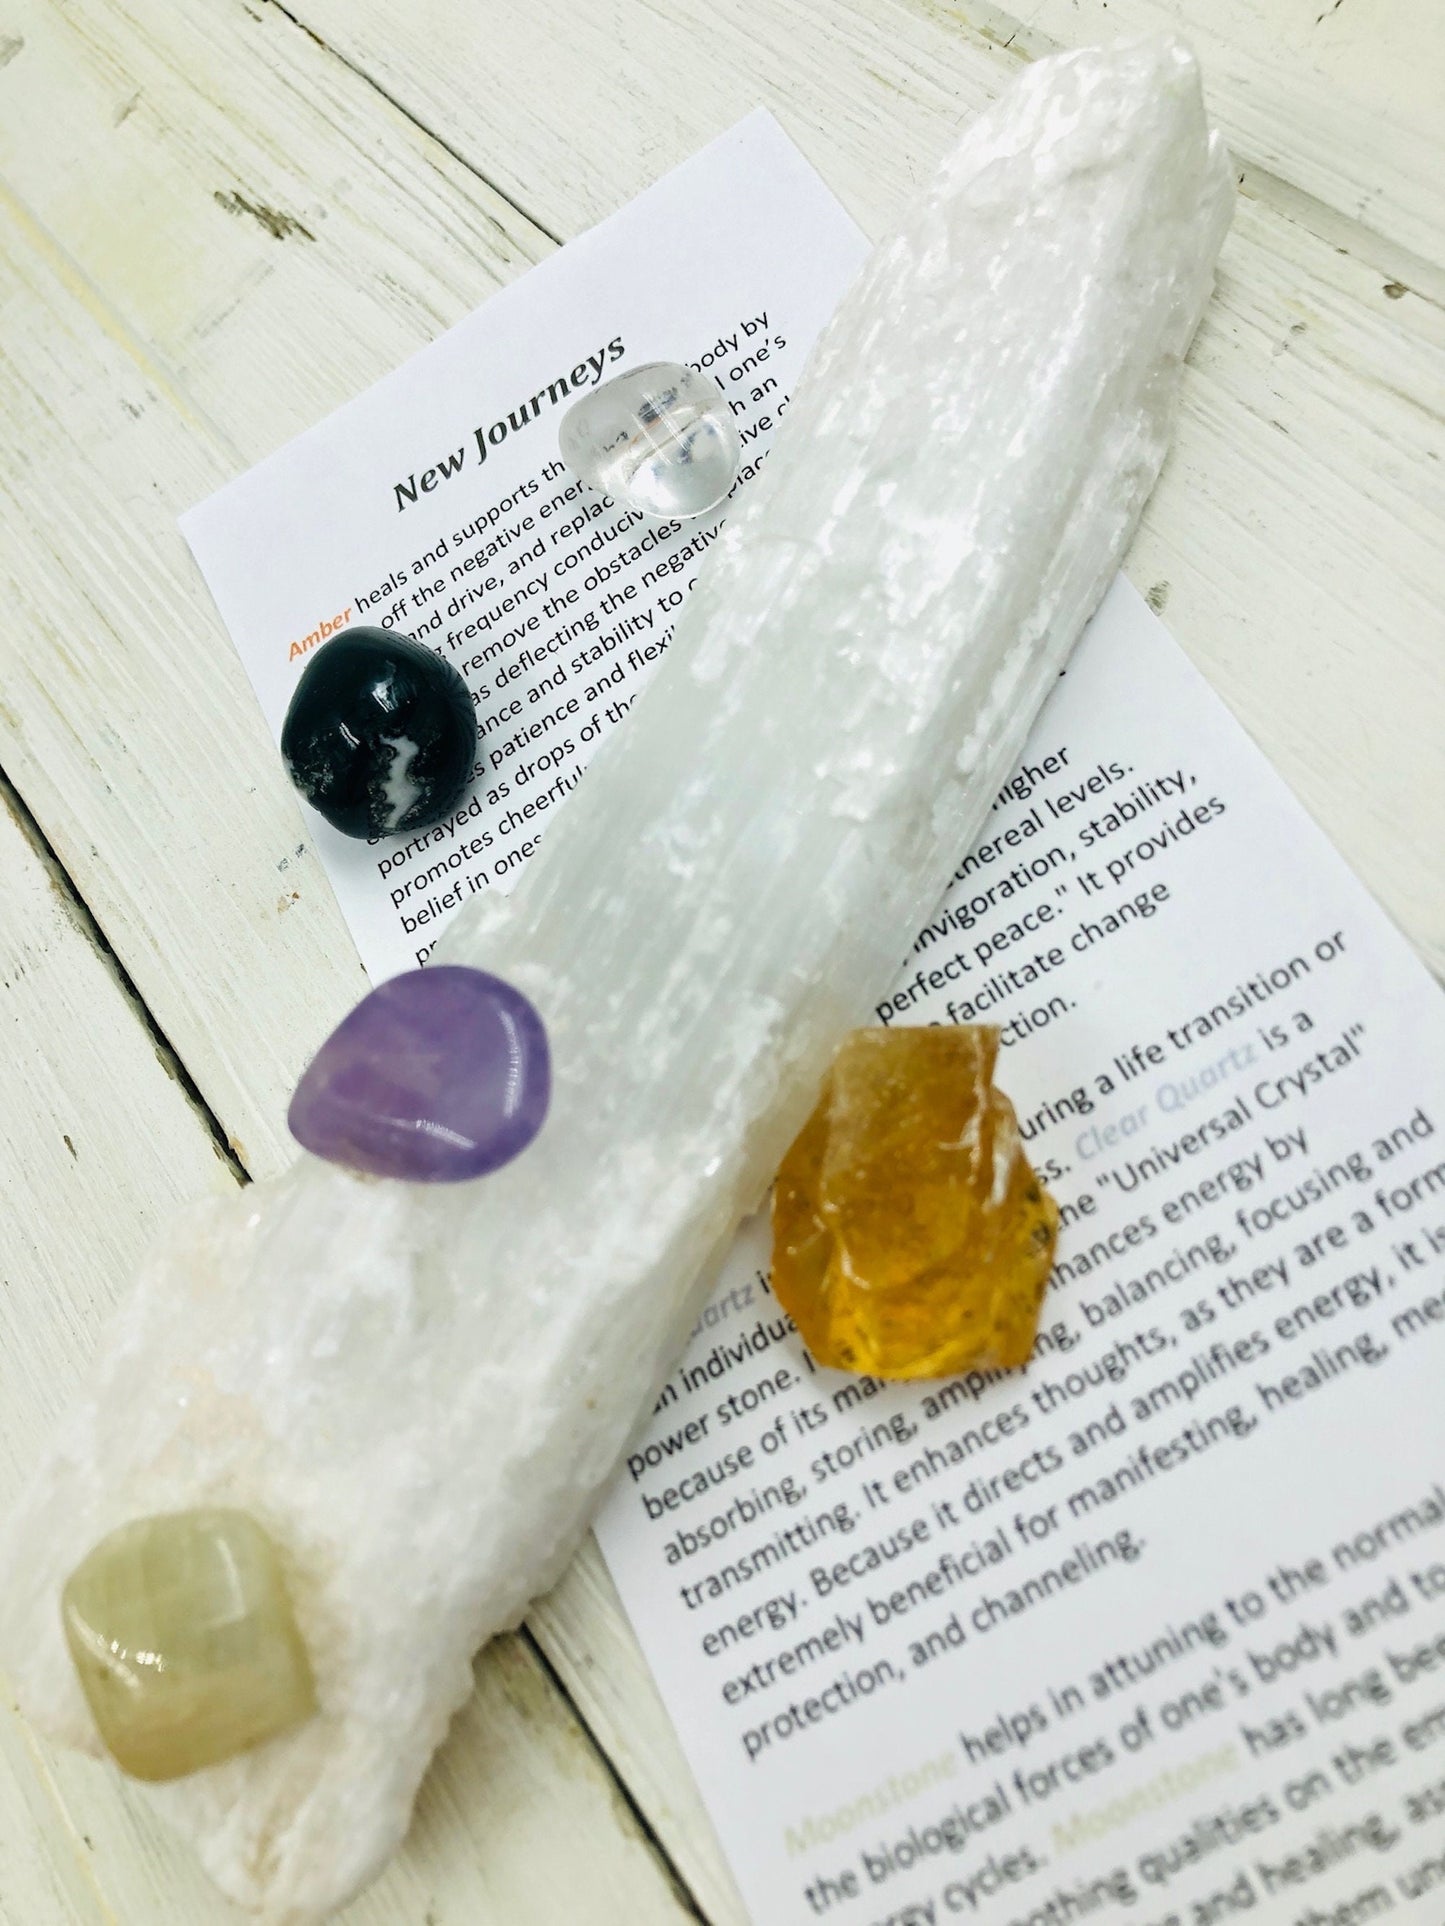 Going Away Crystals Kit - Empower the Journey